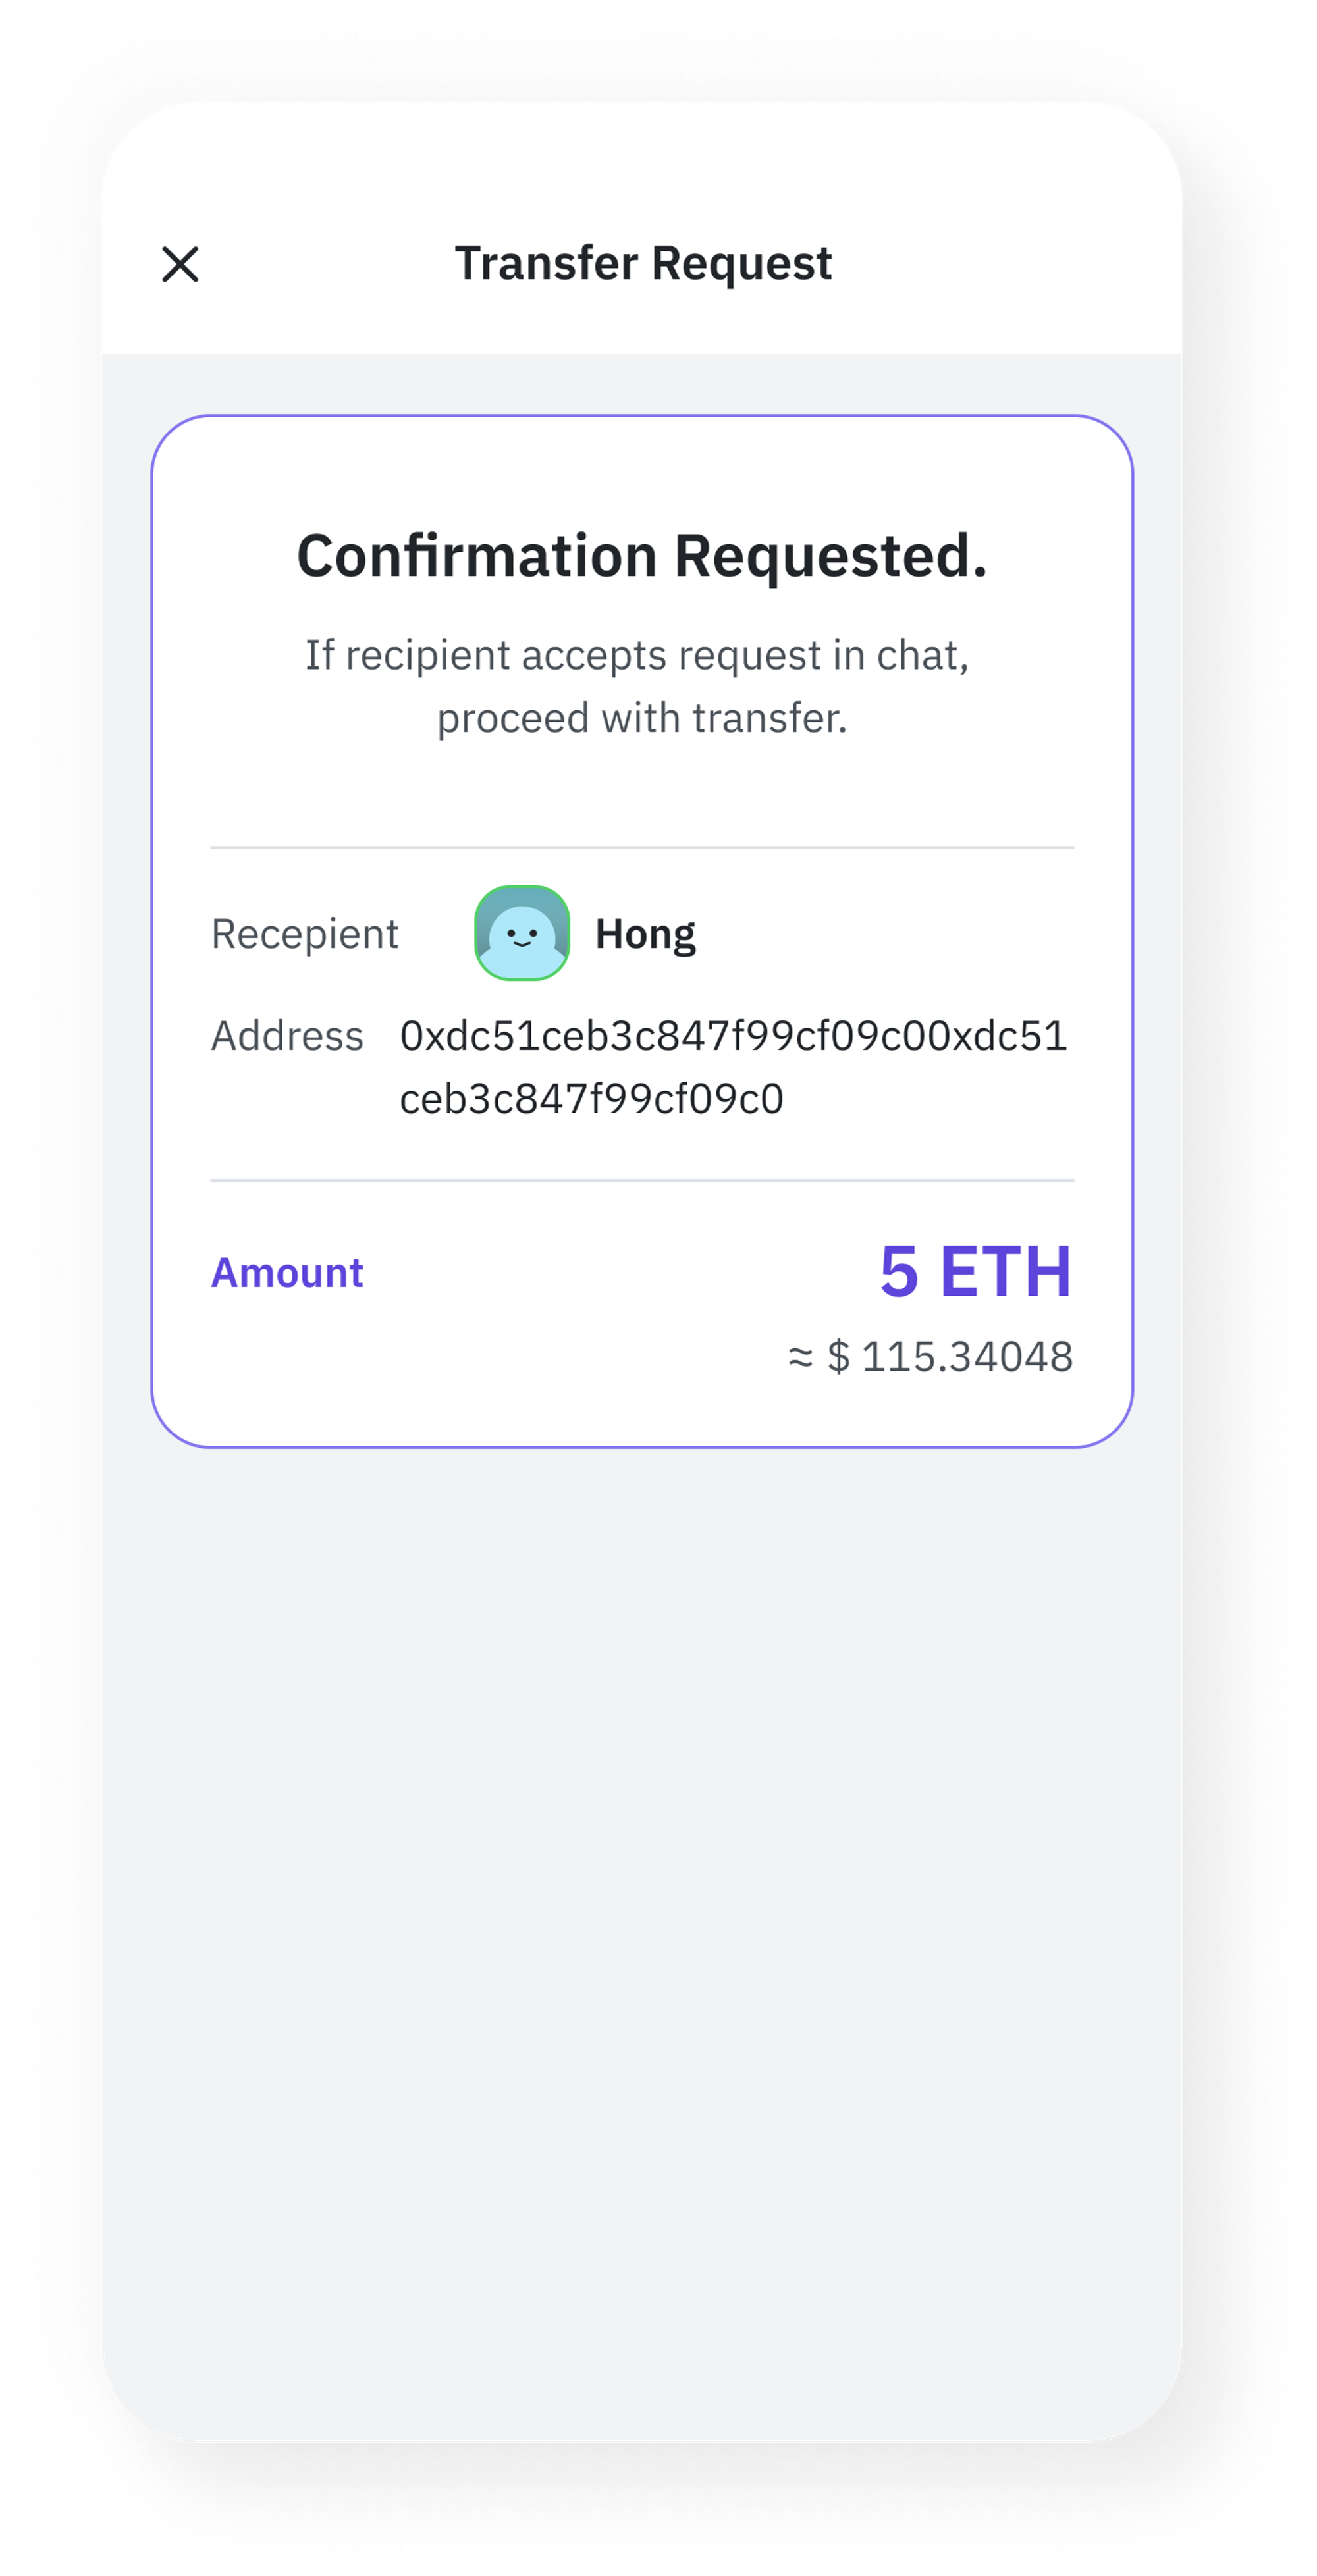 4. Request for token acceptance